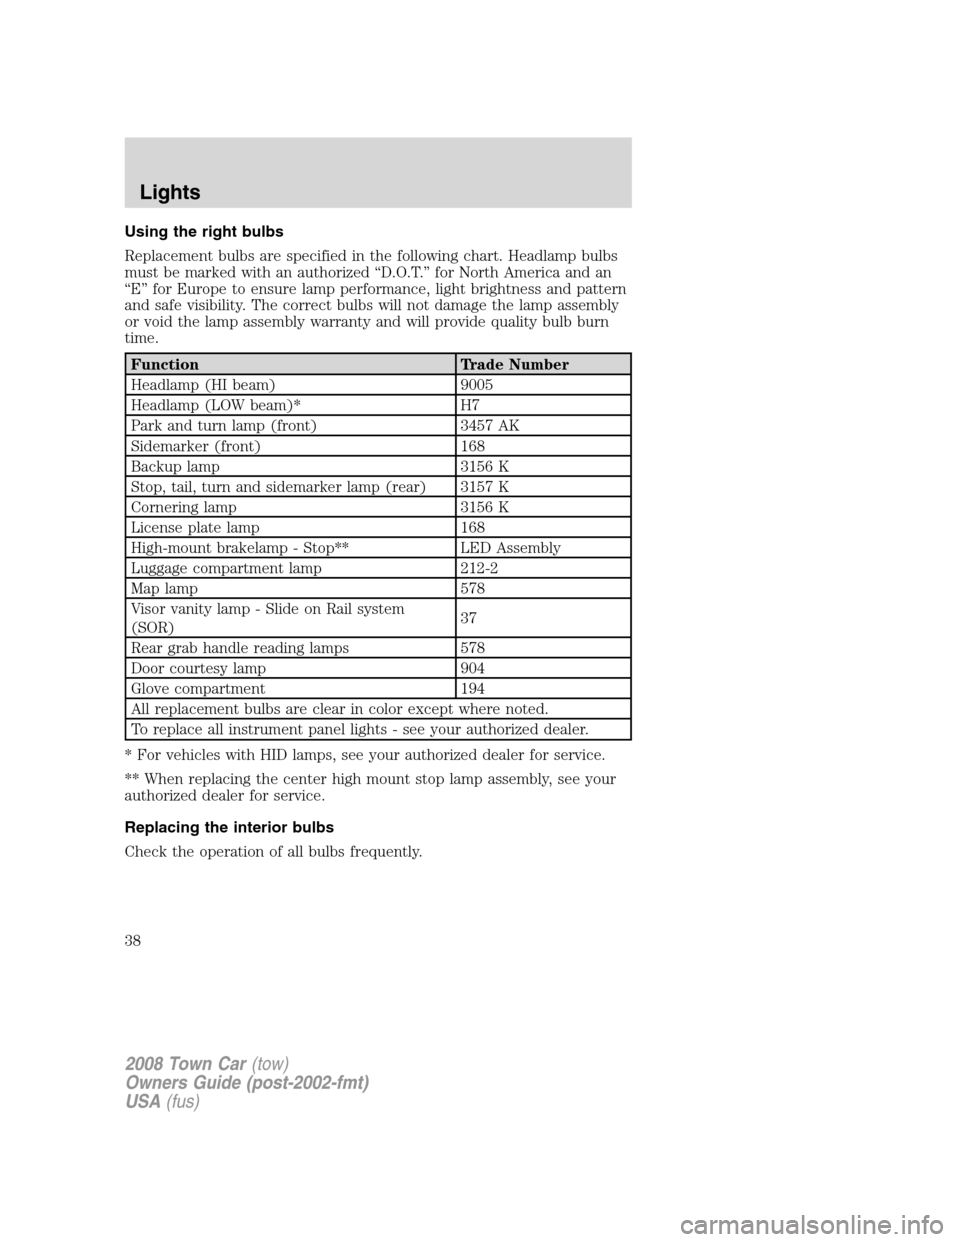 LINCOLN TOWN CAR 2008  Owners Manual Using the right bulbs
Replacement bulbs are specified in the following chart. Headlamp bulbs
must be marked with an authorized “D.O.T.” for North America and an
“E” for Europe to ensure lamp p